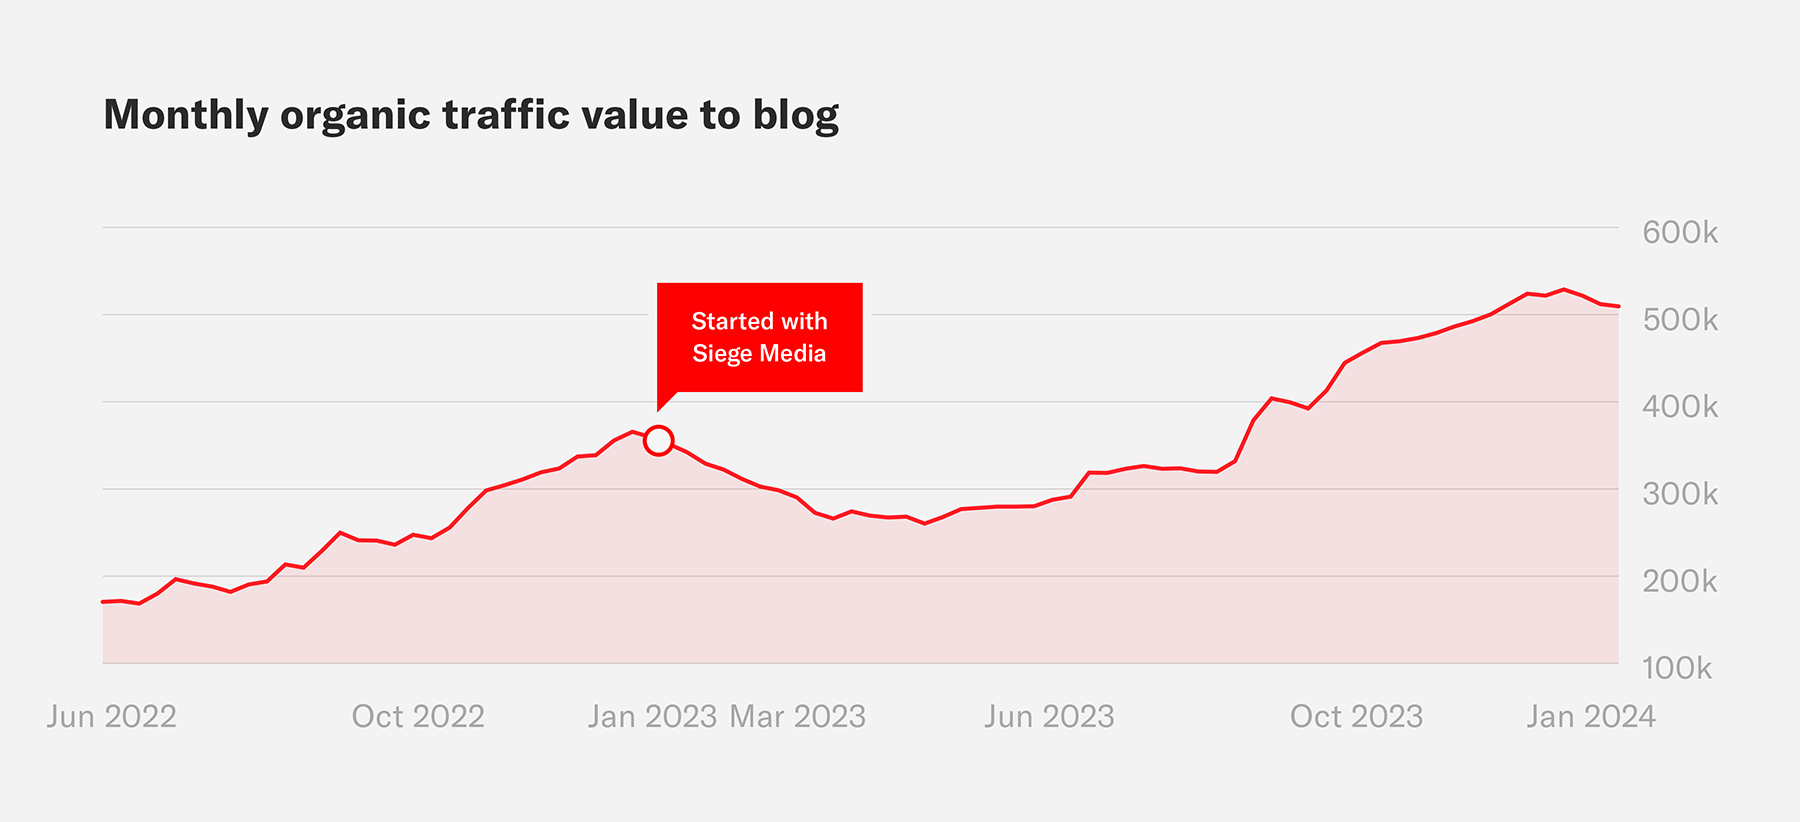 A line graph showing the monthly organic traffic value to the Chime blog.